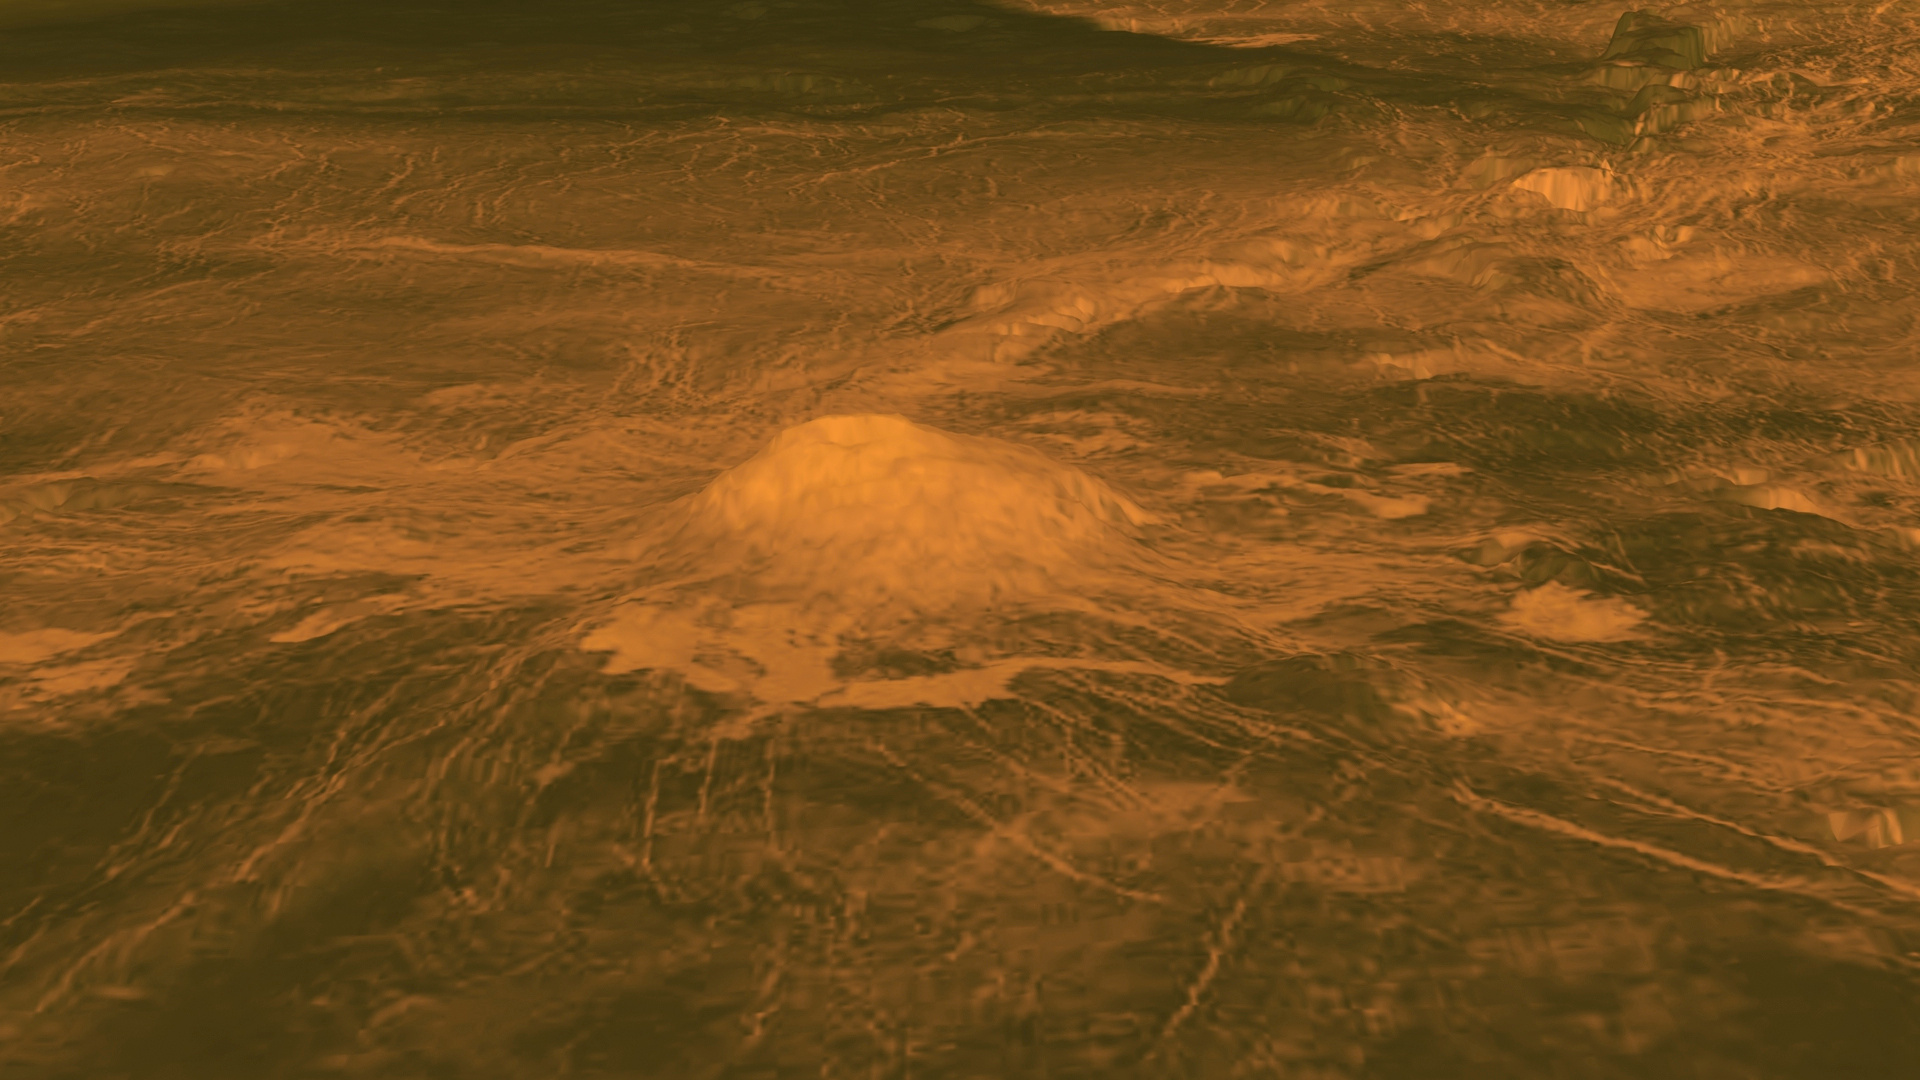 Orange hued image shows a peak (Idunn Mons volcano) rising up from the surface of Venus.